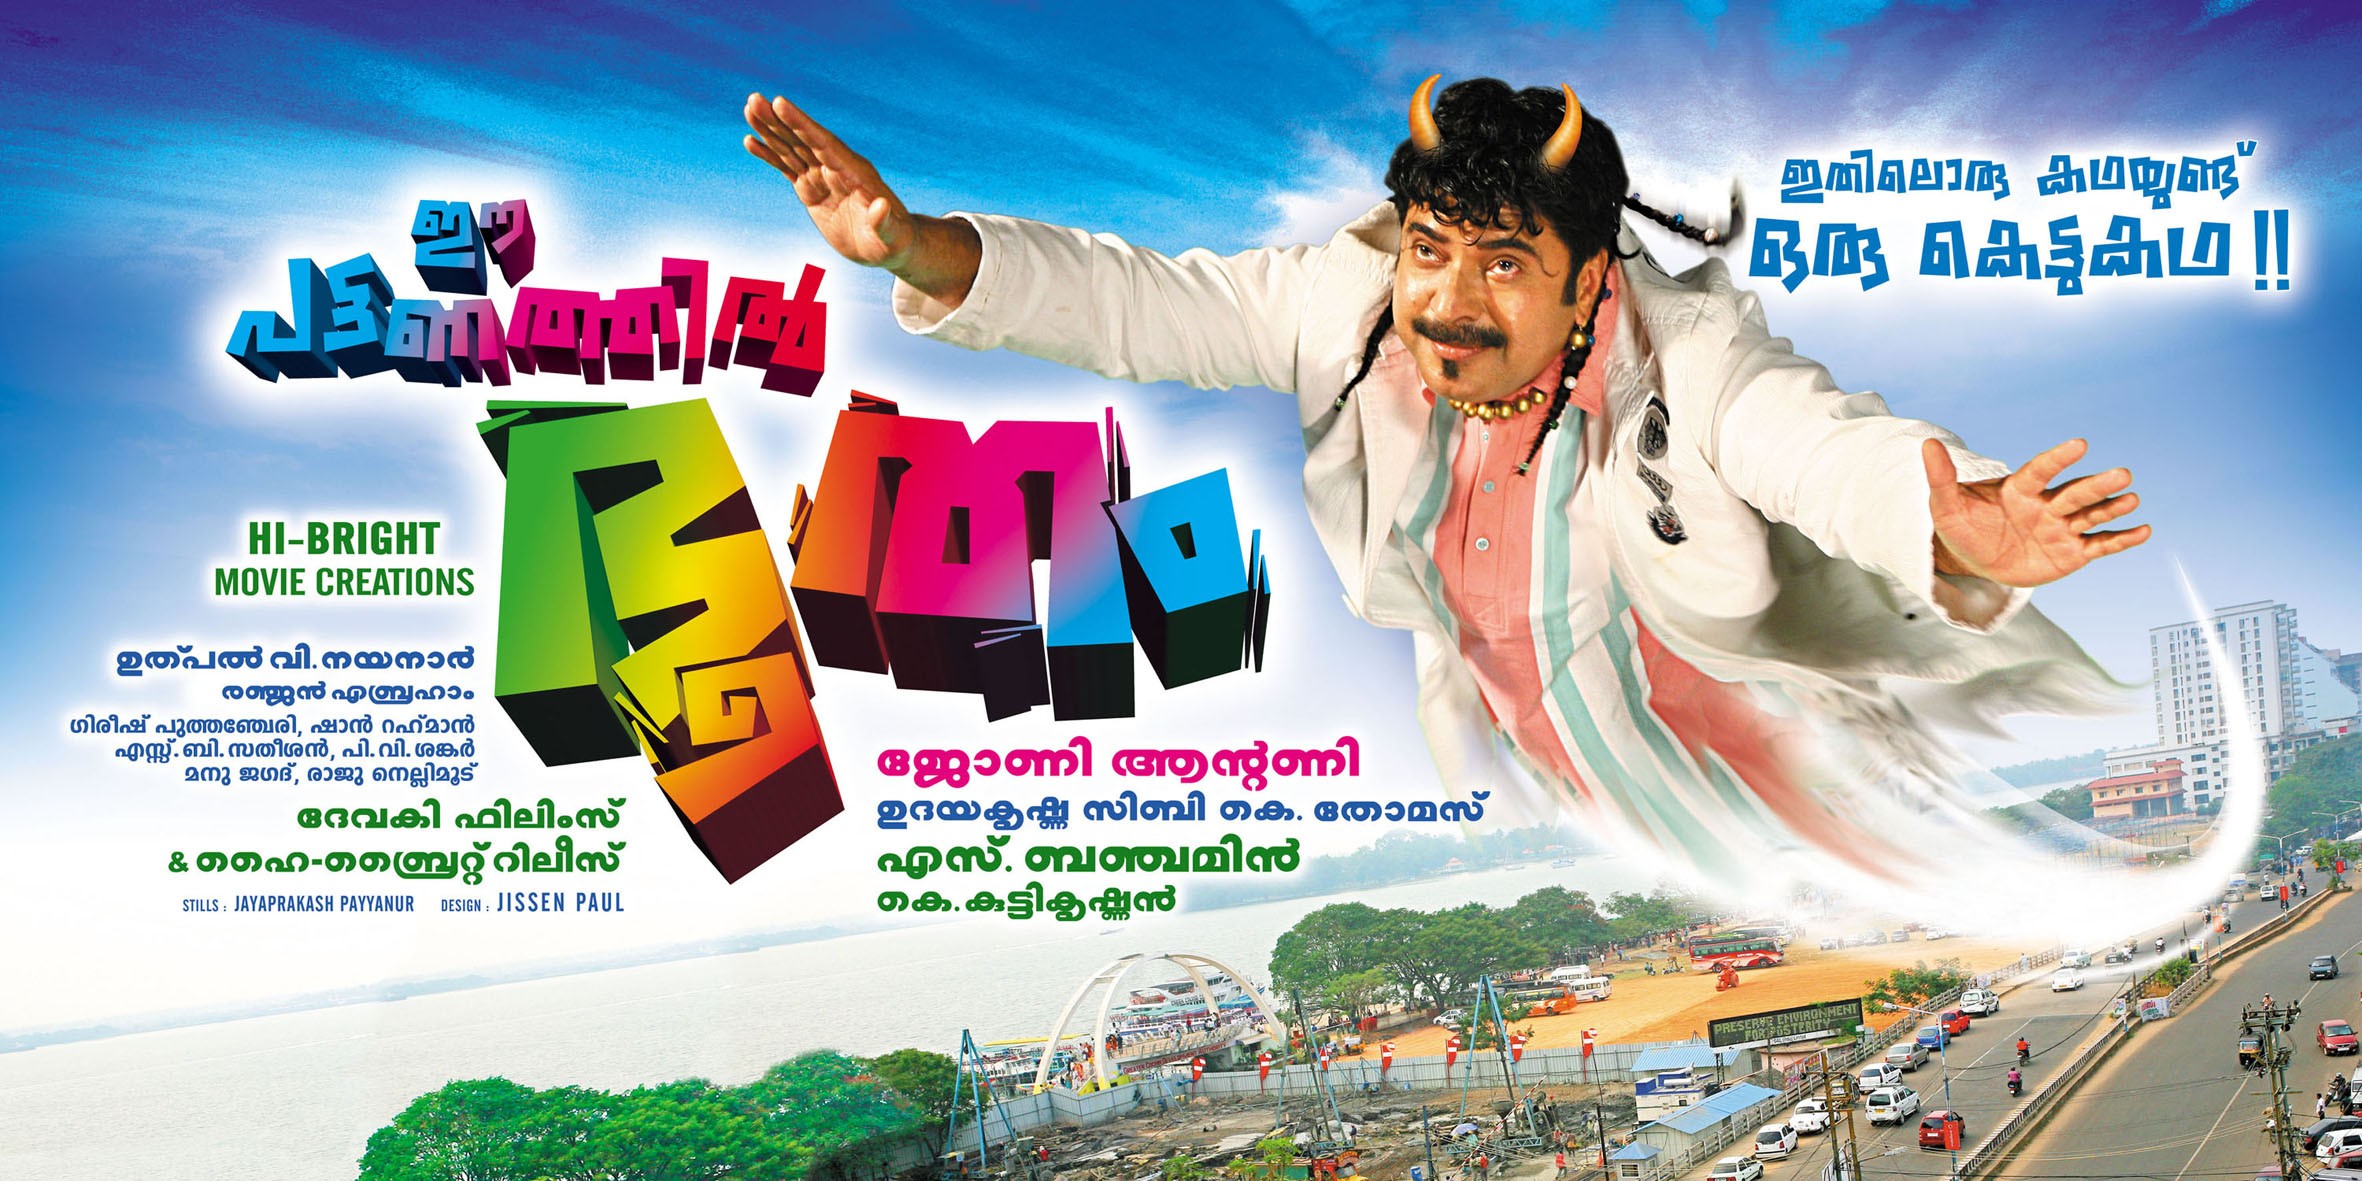 Mega Sized Movie Poster Image for Ee Pattanathil Bhootham (#3 of 3)